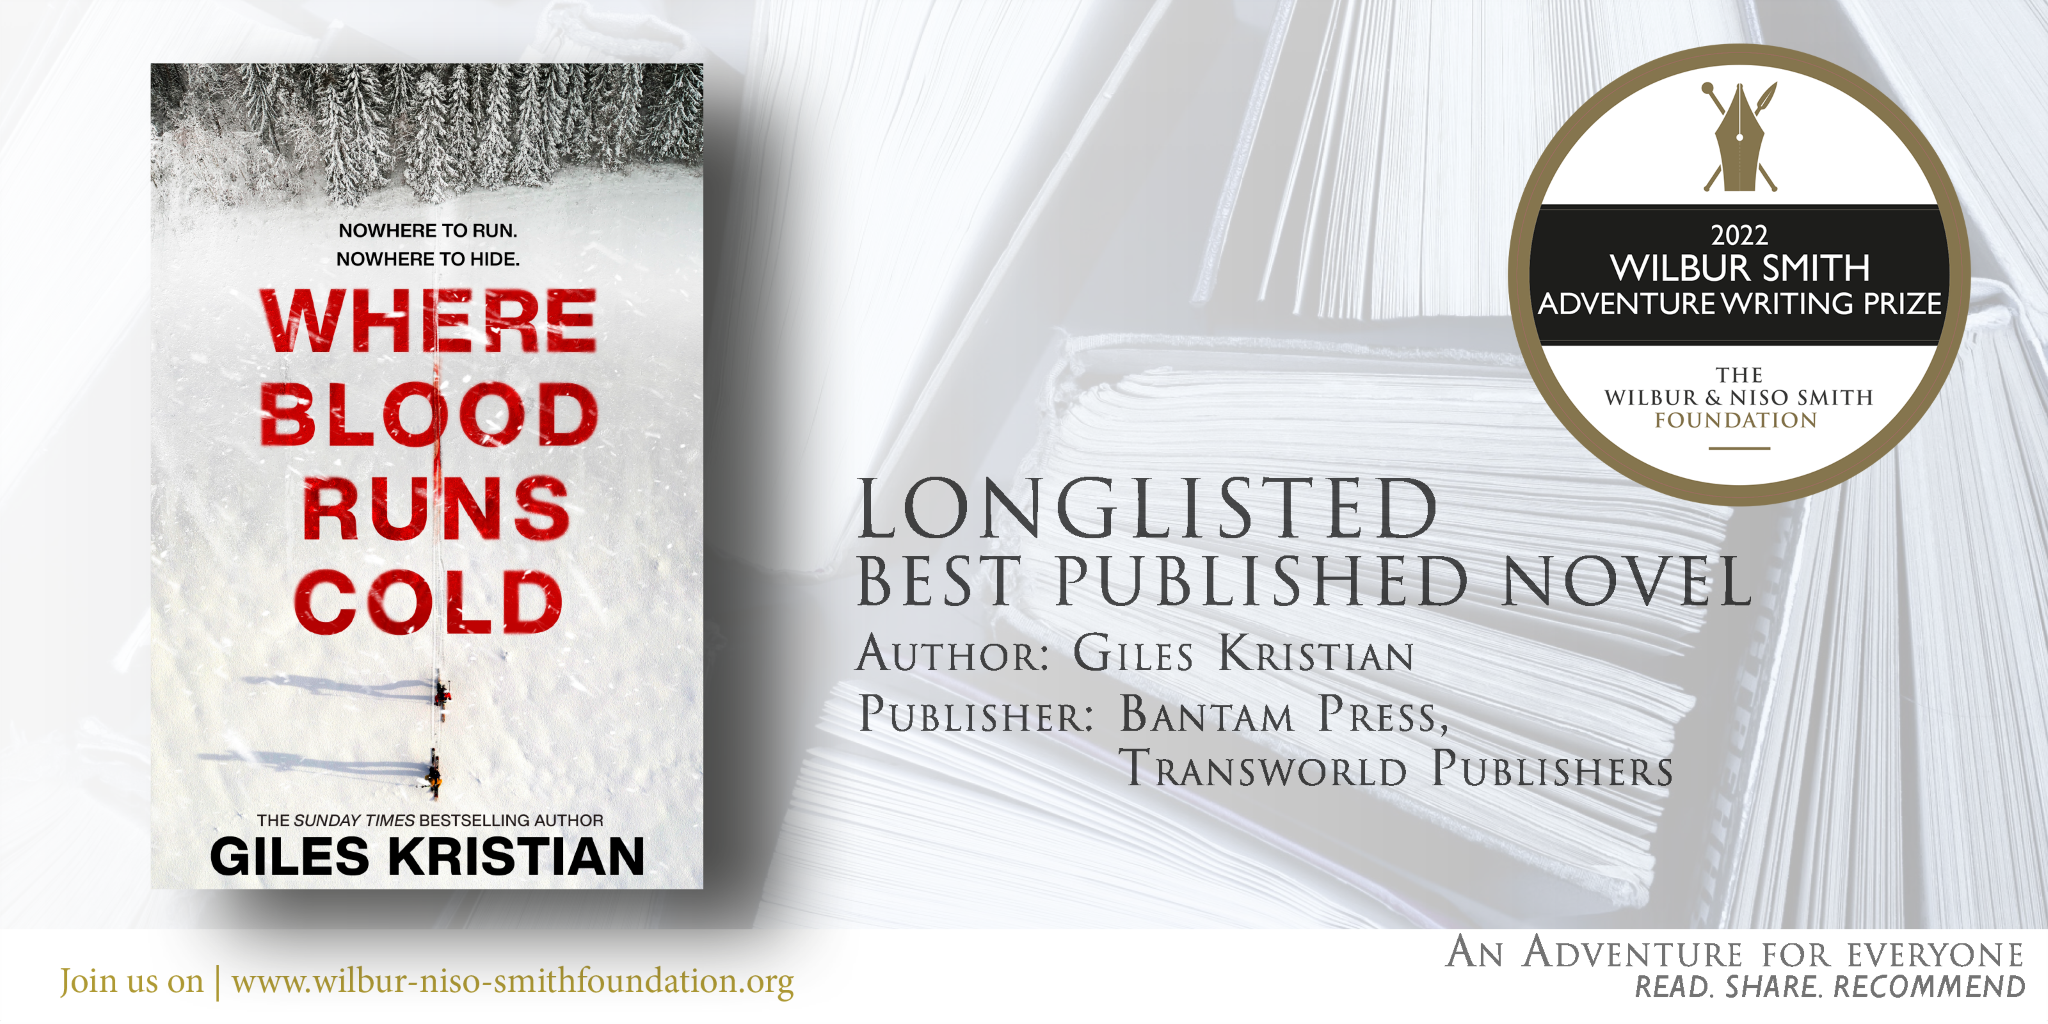 Where Blood Runs Cold' has been longlisted. — Giles Kristian